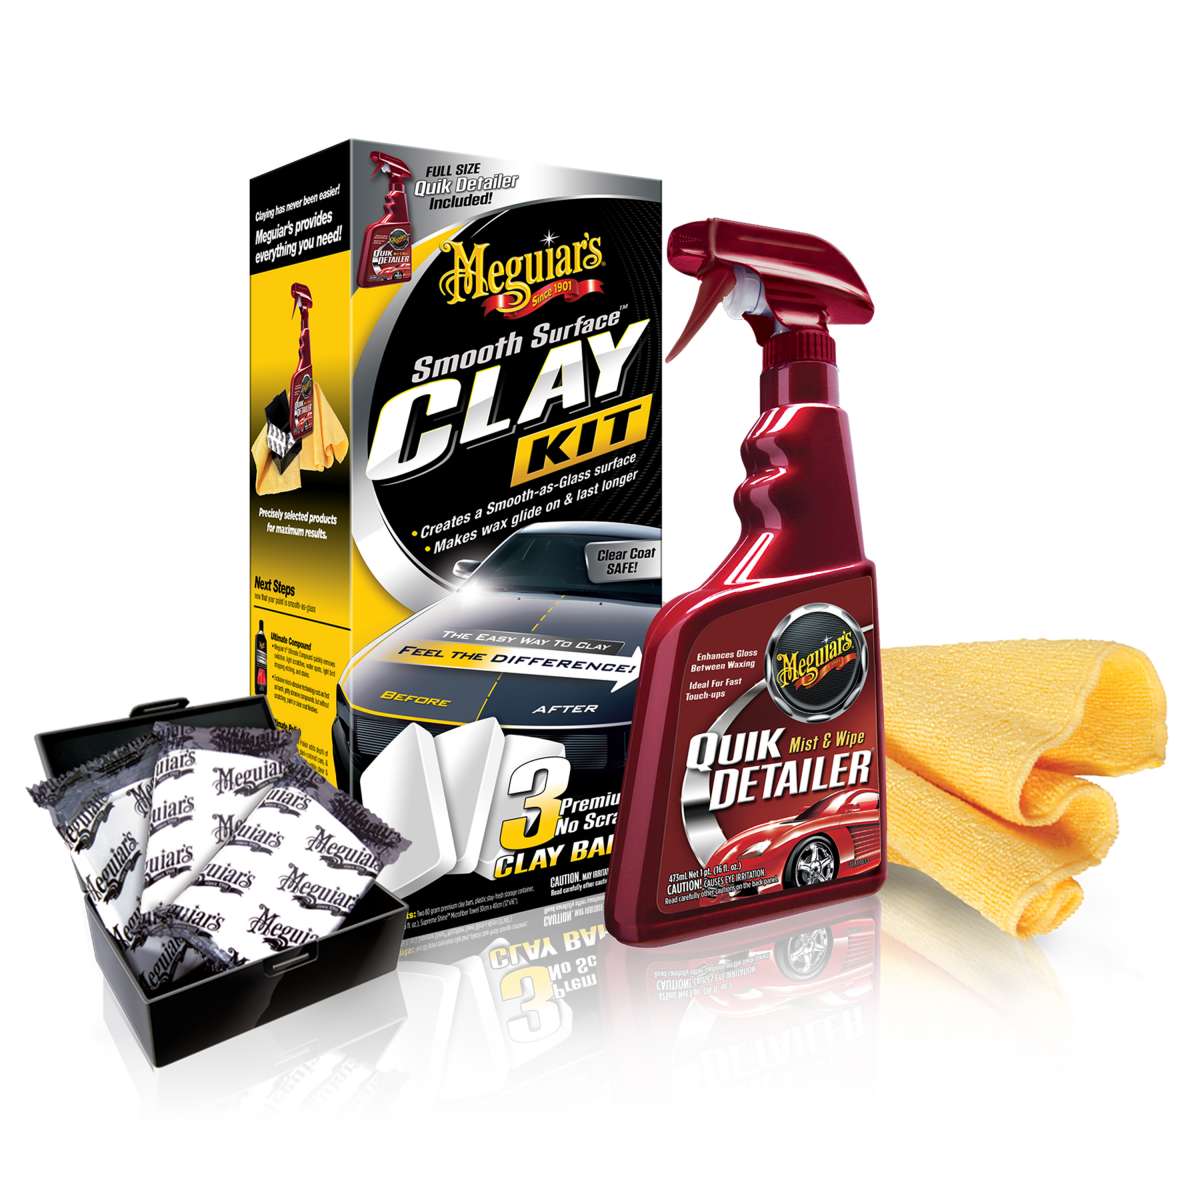  Meguiar's Smooth Surface Clay Kit